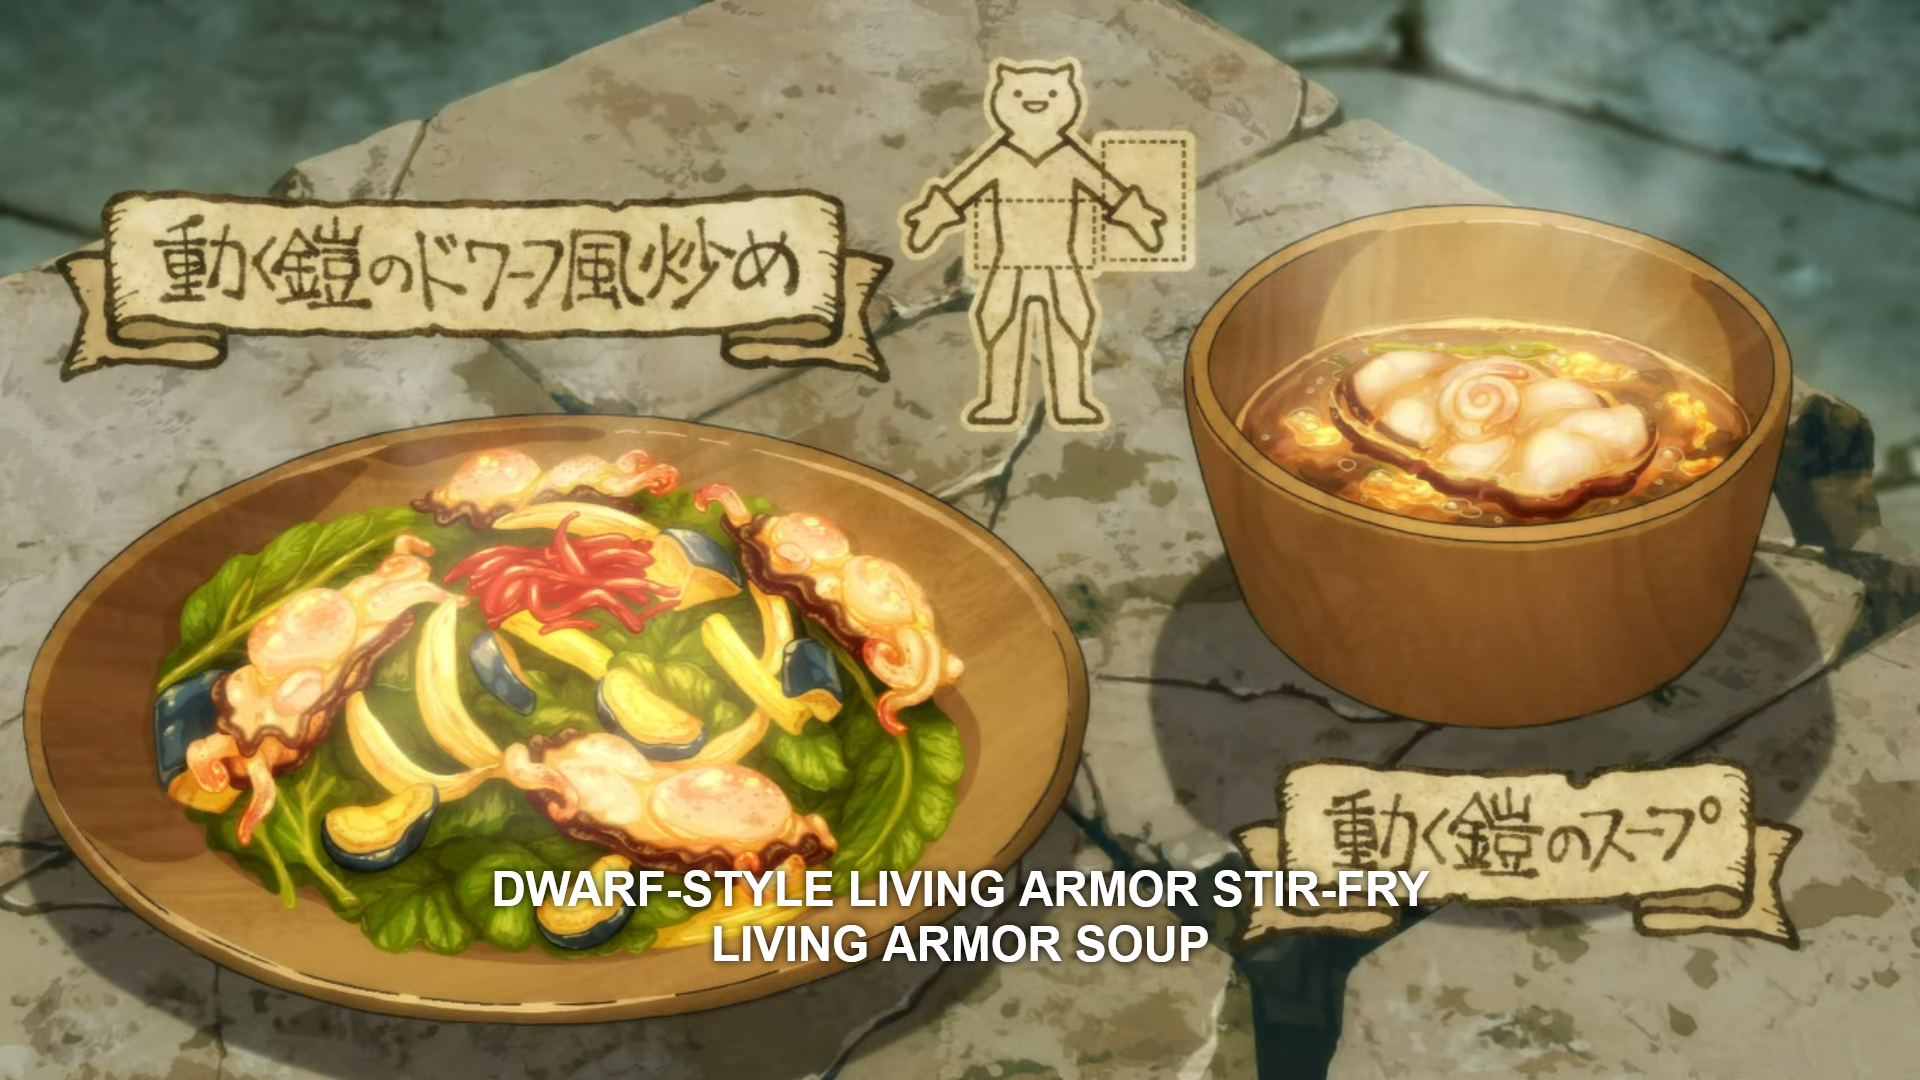 In Delicious in Dungeon's episode three we're treated to quite a few spins on food featuring Living Armor